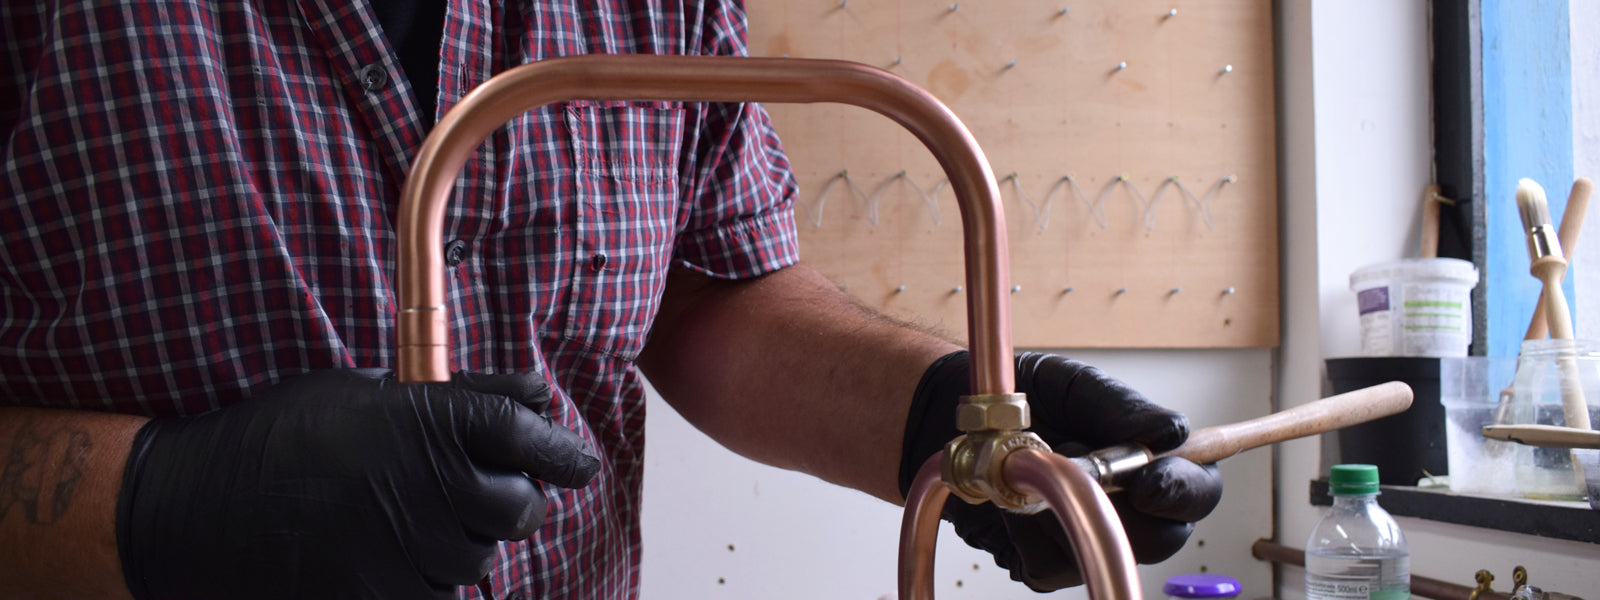 treating a polished copper tap